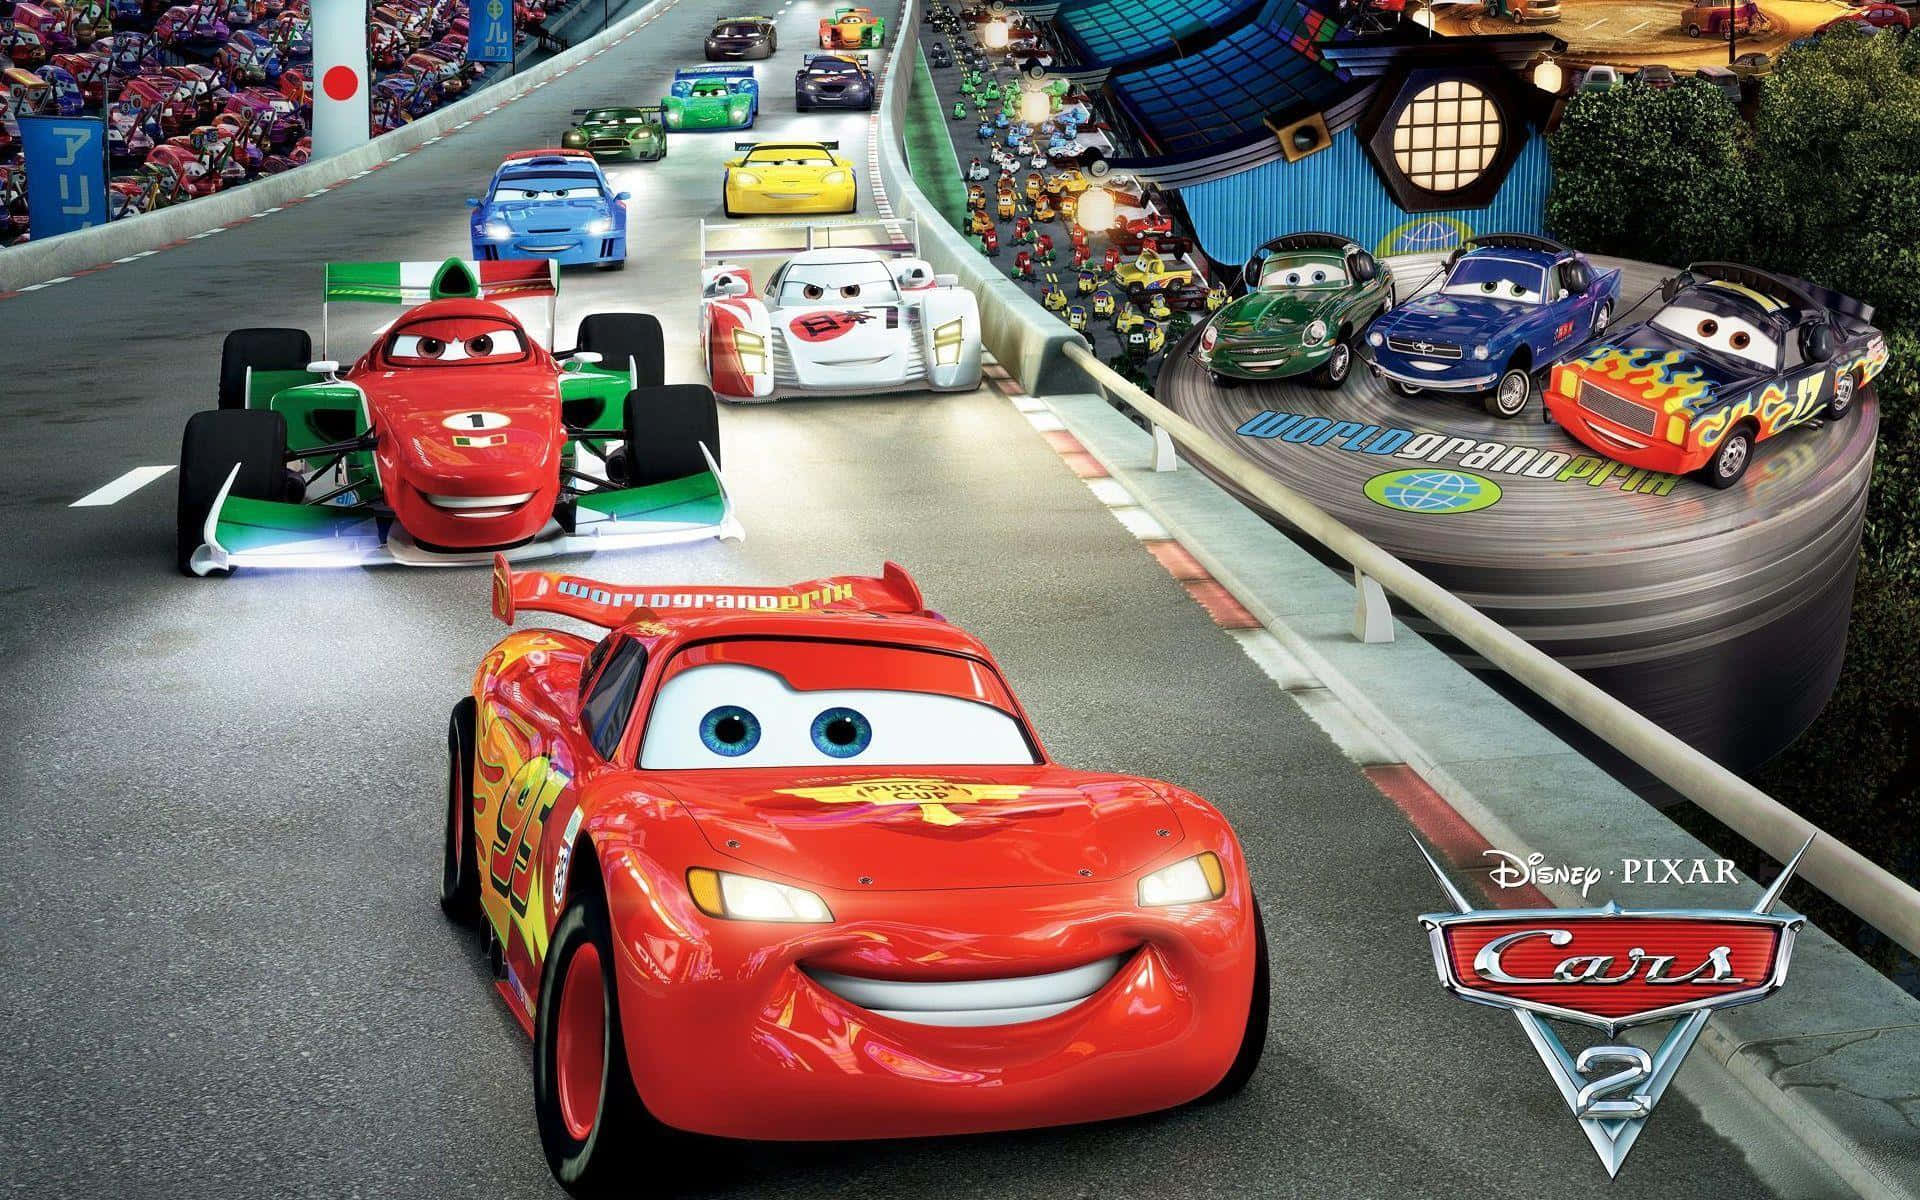 Lightning McQueen races on the track in a vibrant Disney Cars themed background.